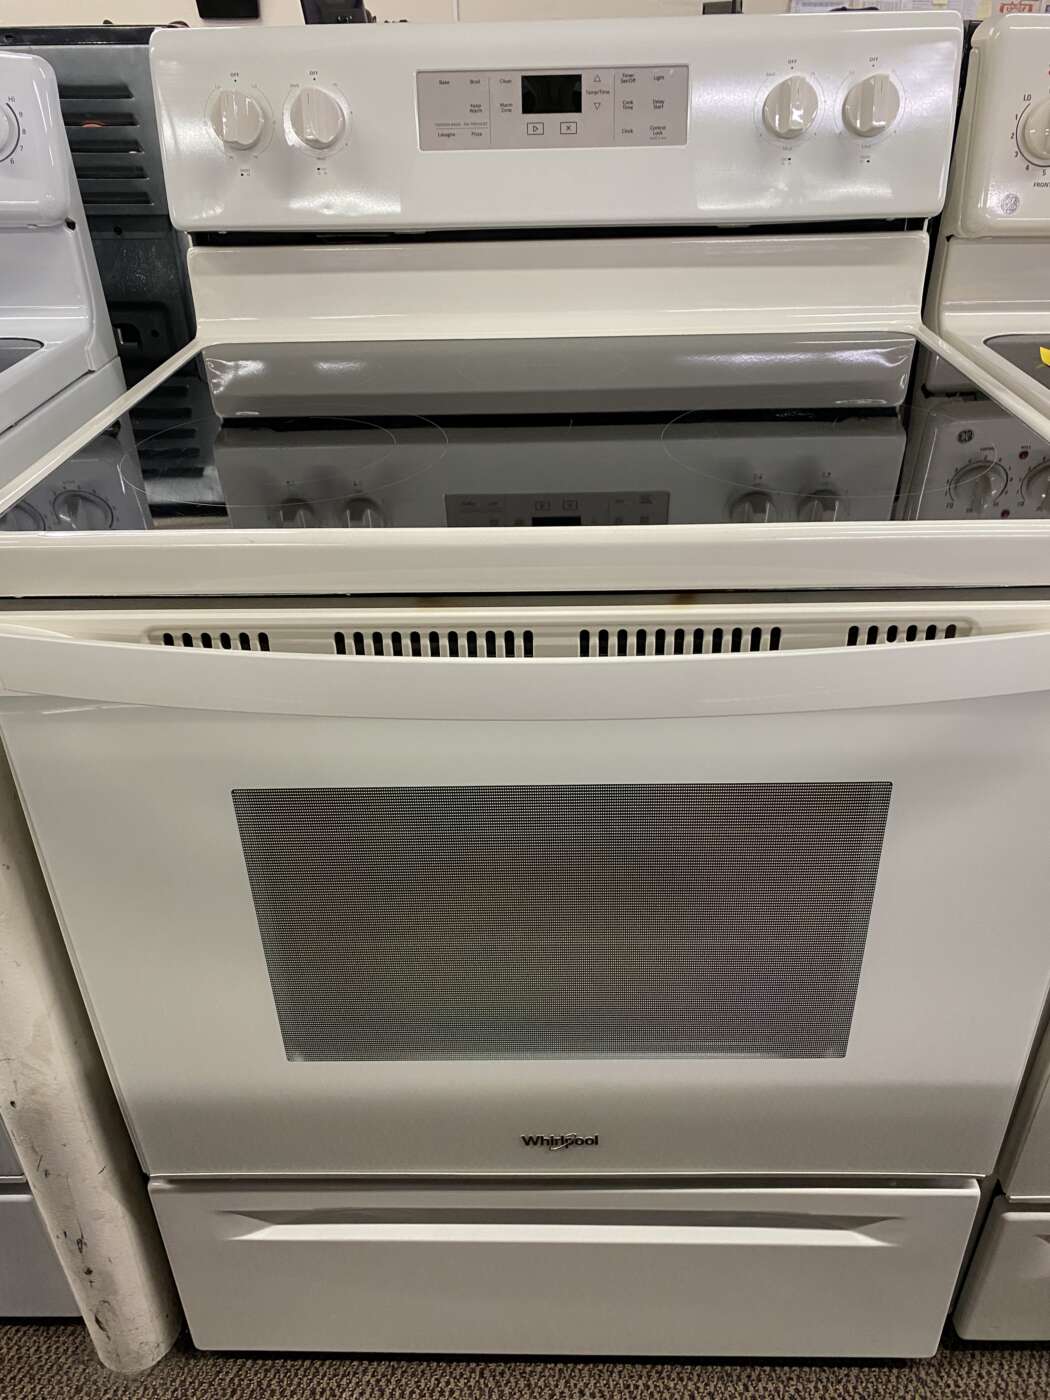 Reconditioned WHIRLPOOL Self-Clean Oven Electric Range – Bisque